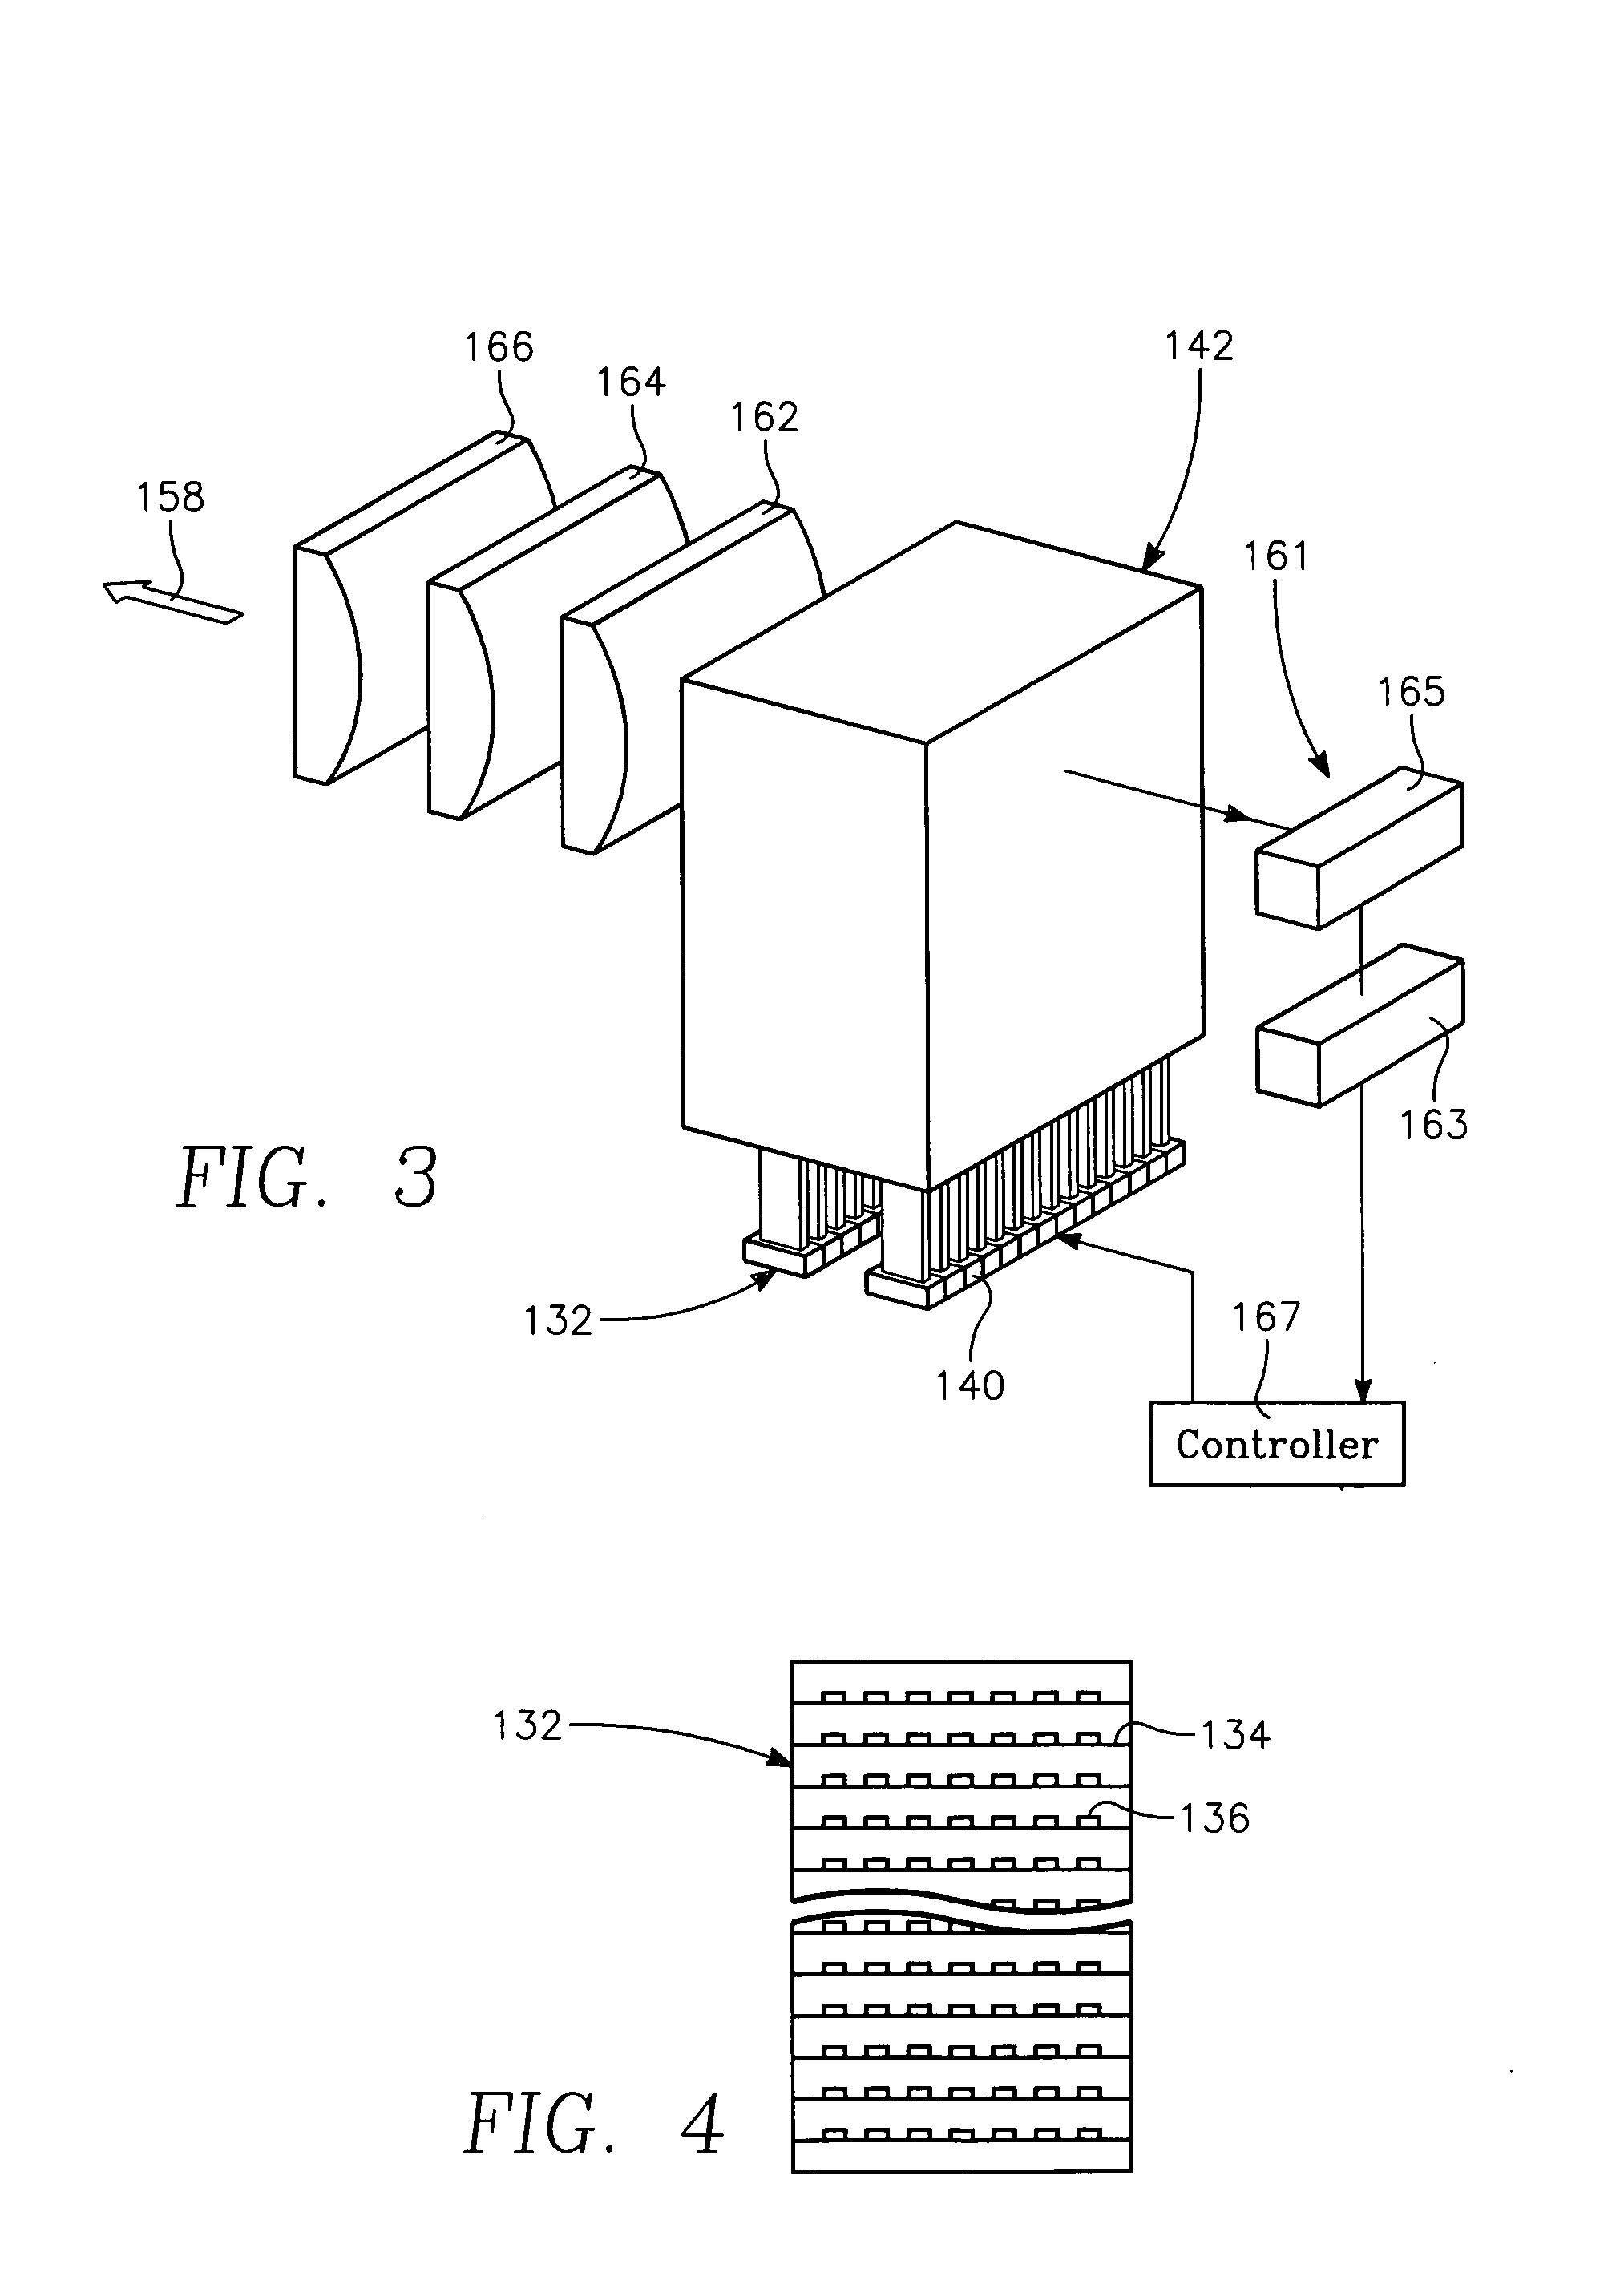 Process for low temperature plasma deposition of an optical absorption layer and high speed optical annealing